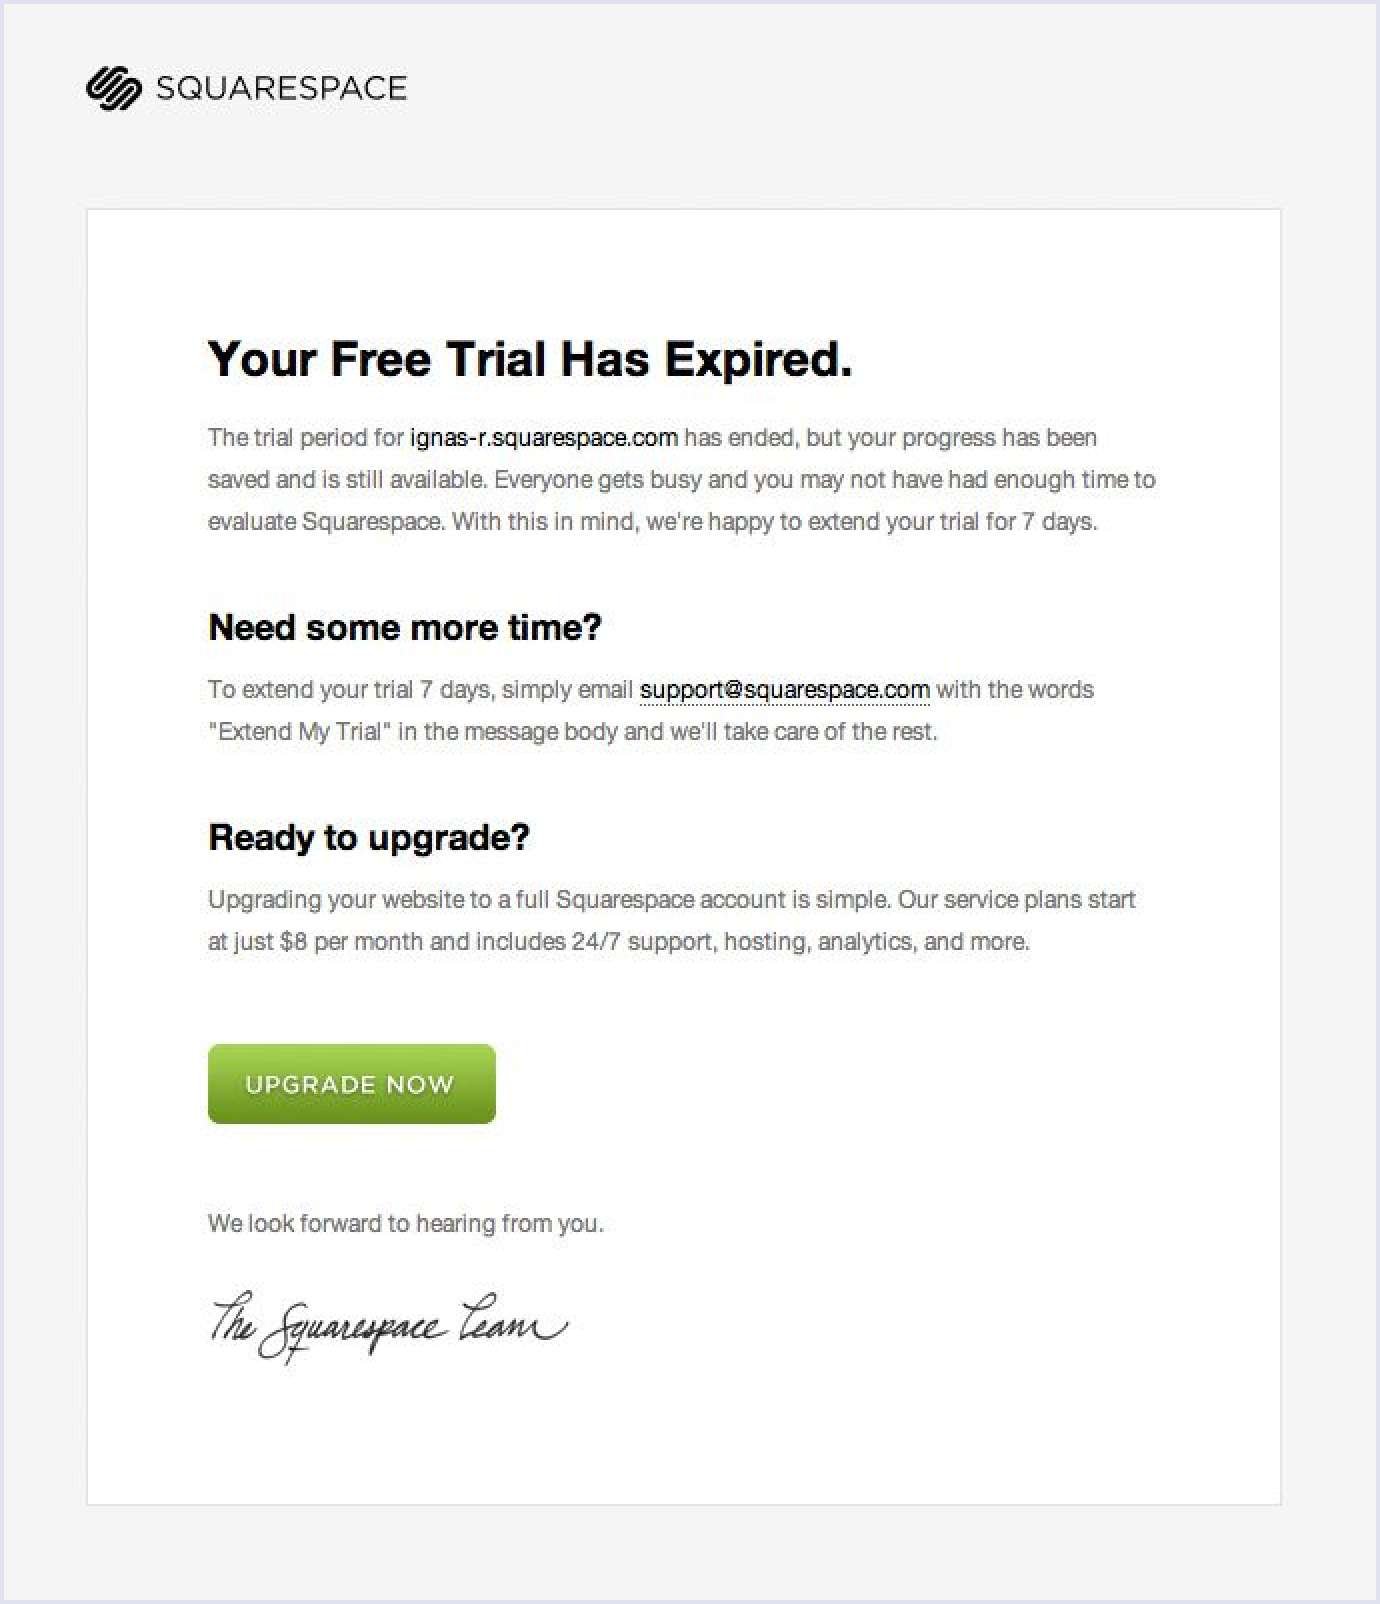 Free trial end notification from Squarespace